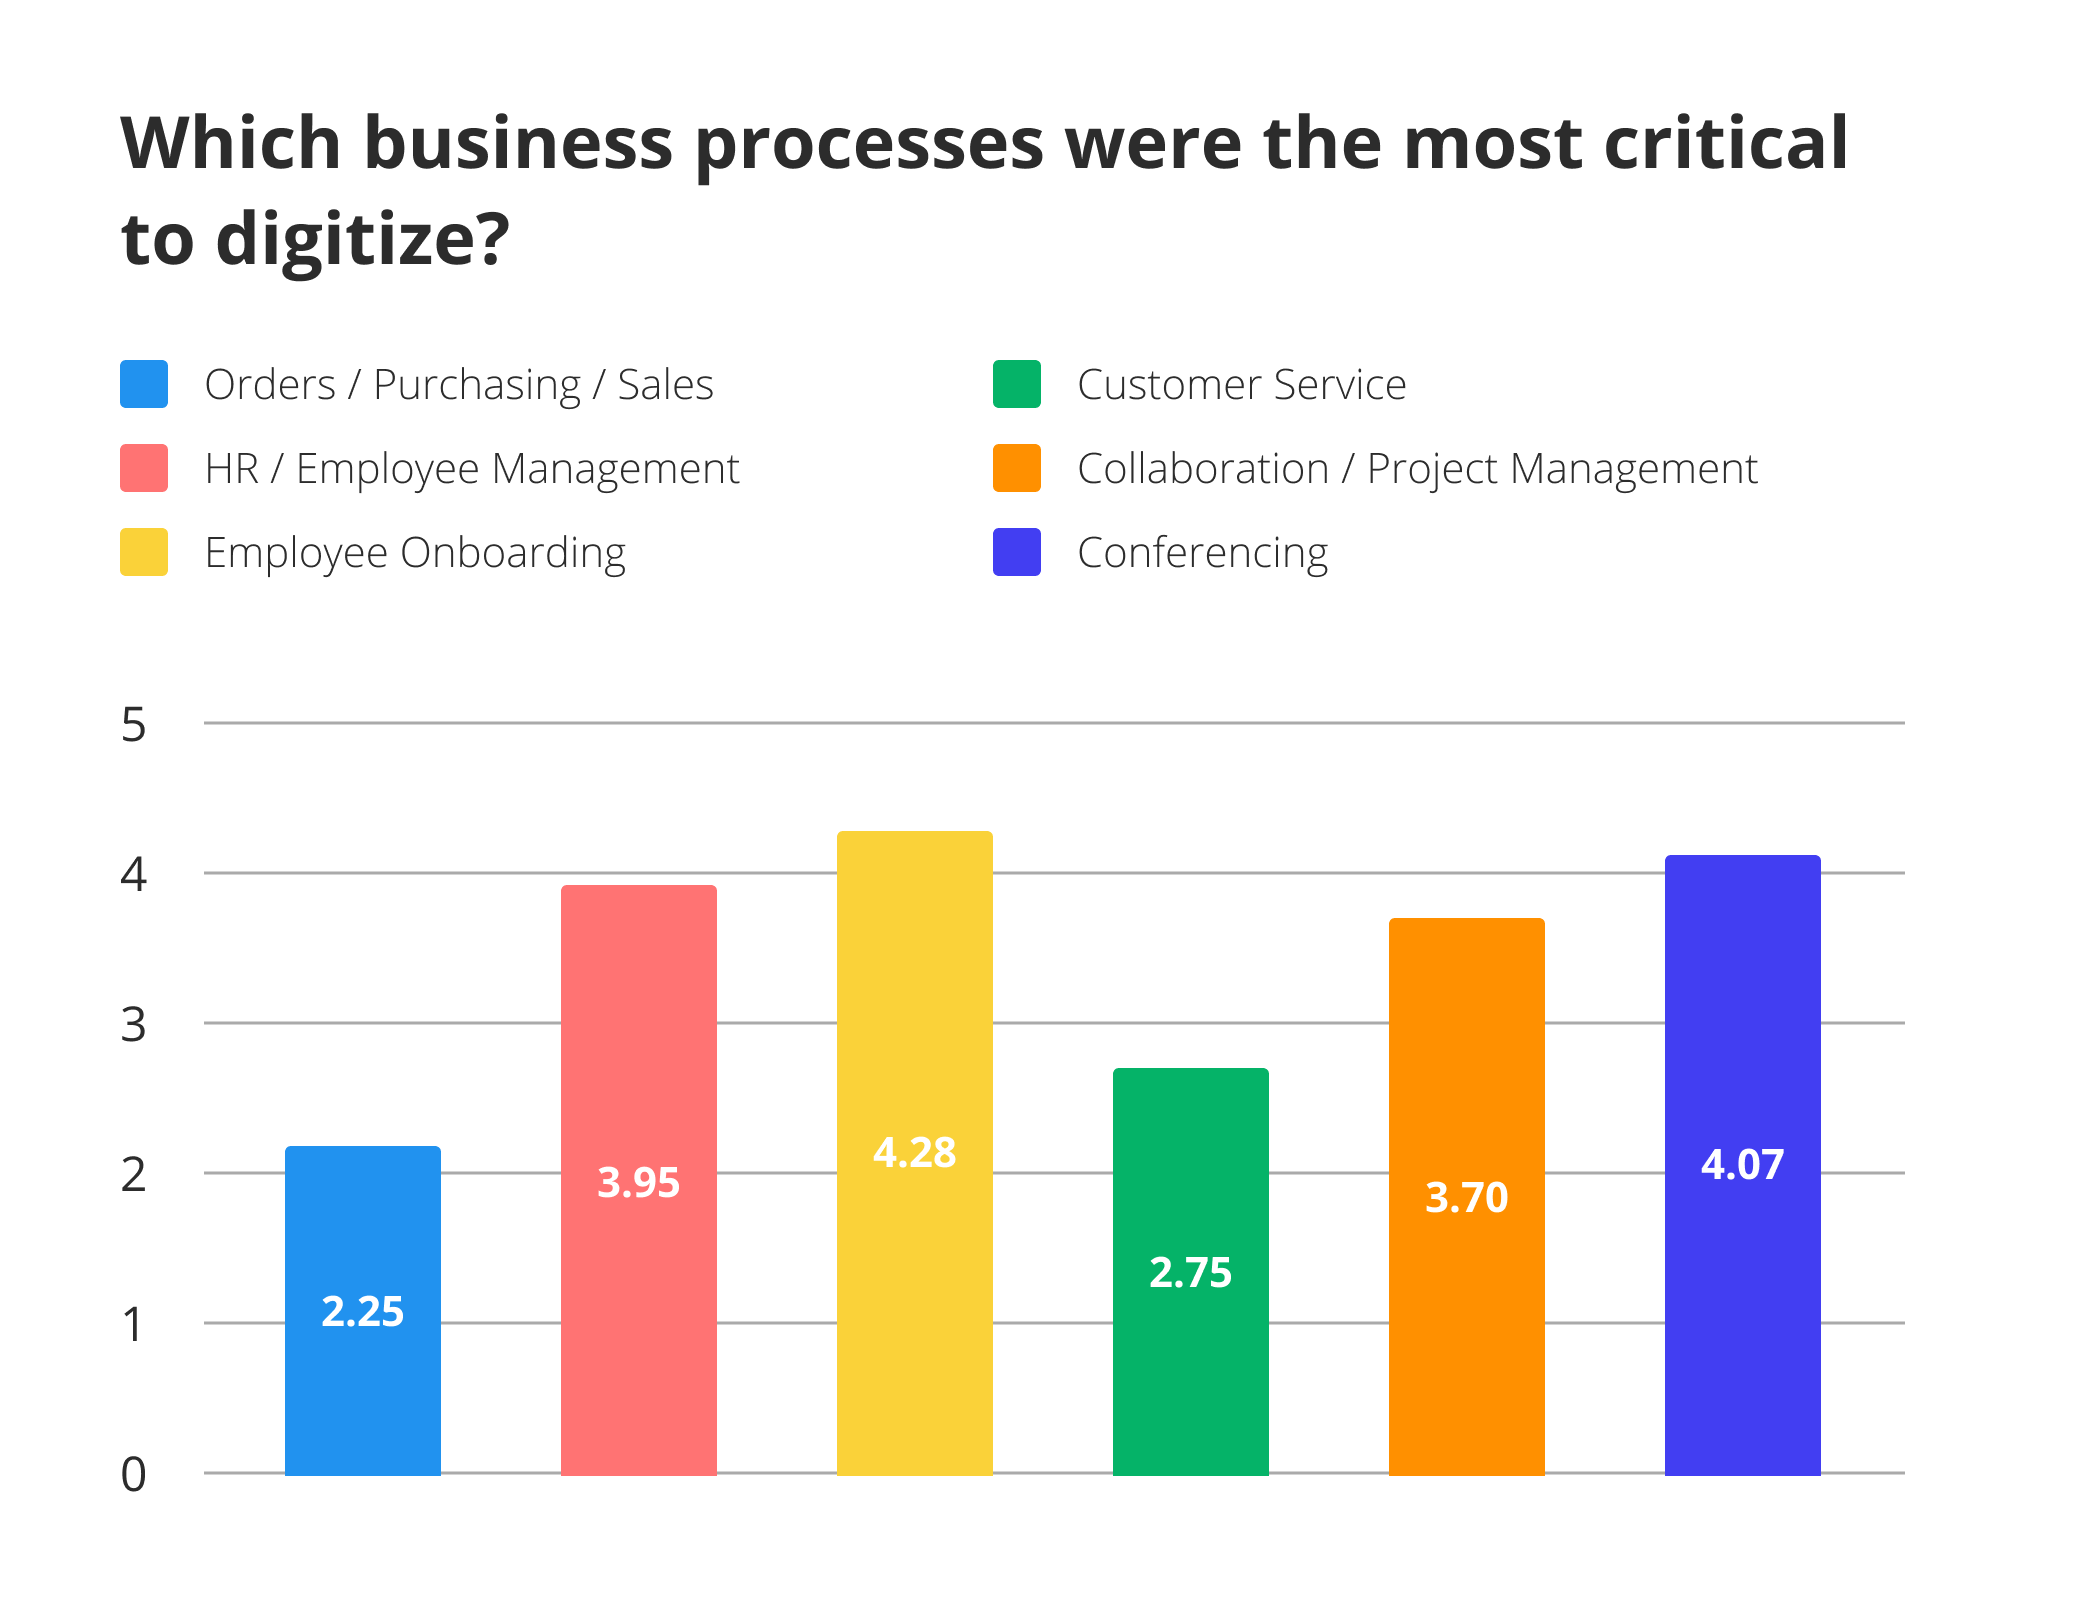 Employee onboarding was indicated as the most critical business process for digitization - comparative diagram